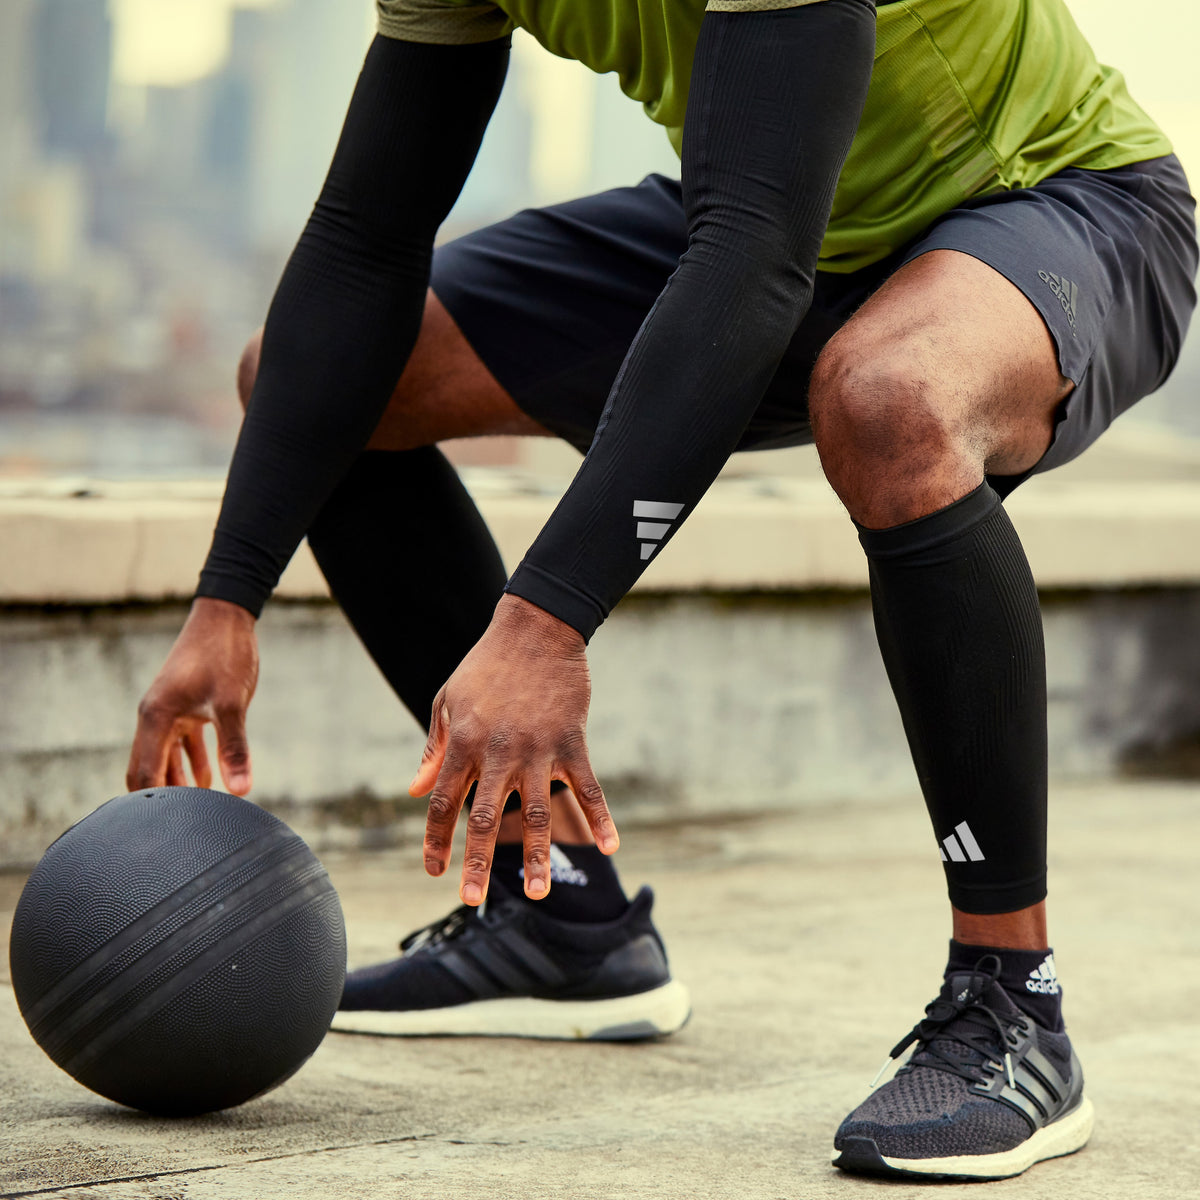 Upgrade Your Workout with Adidas Calf Sleeves